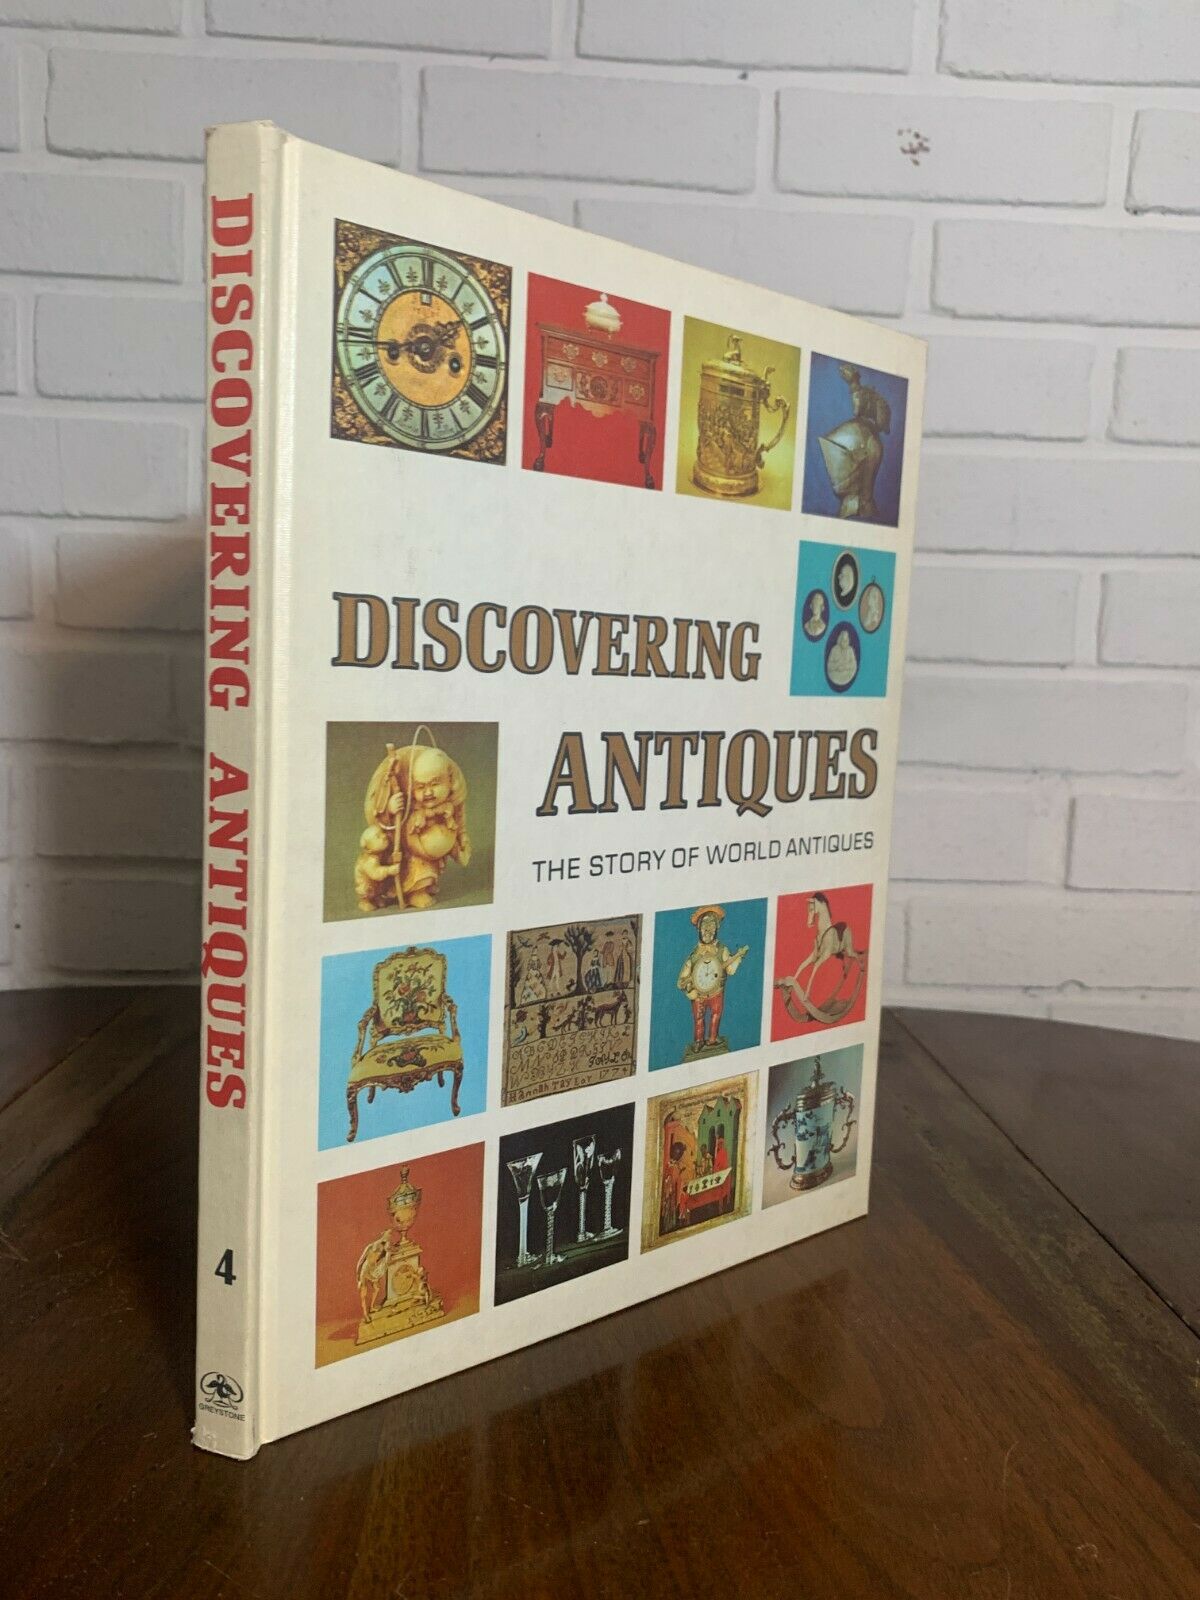 Discovering Antiques The Story of World Antiques Volume 4 (1972-1973)